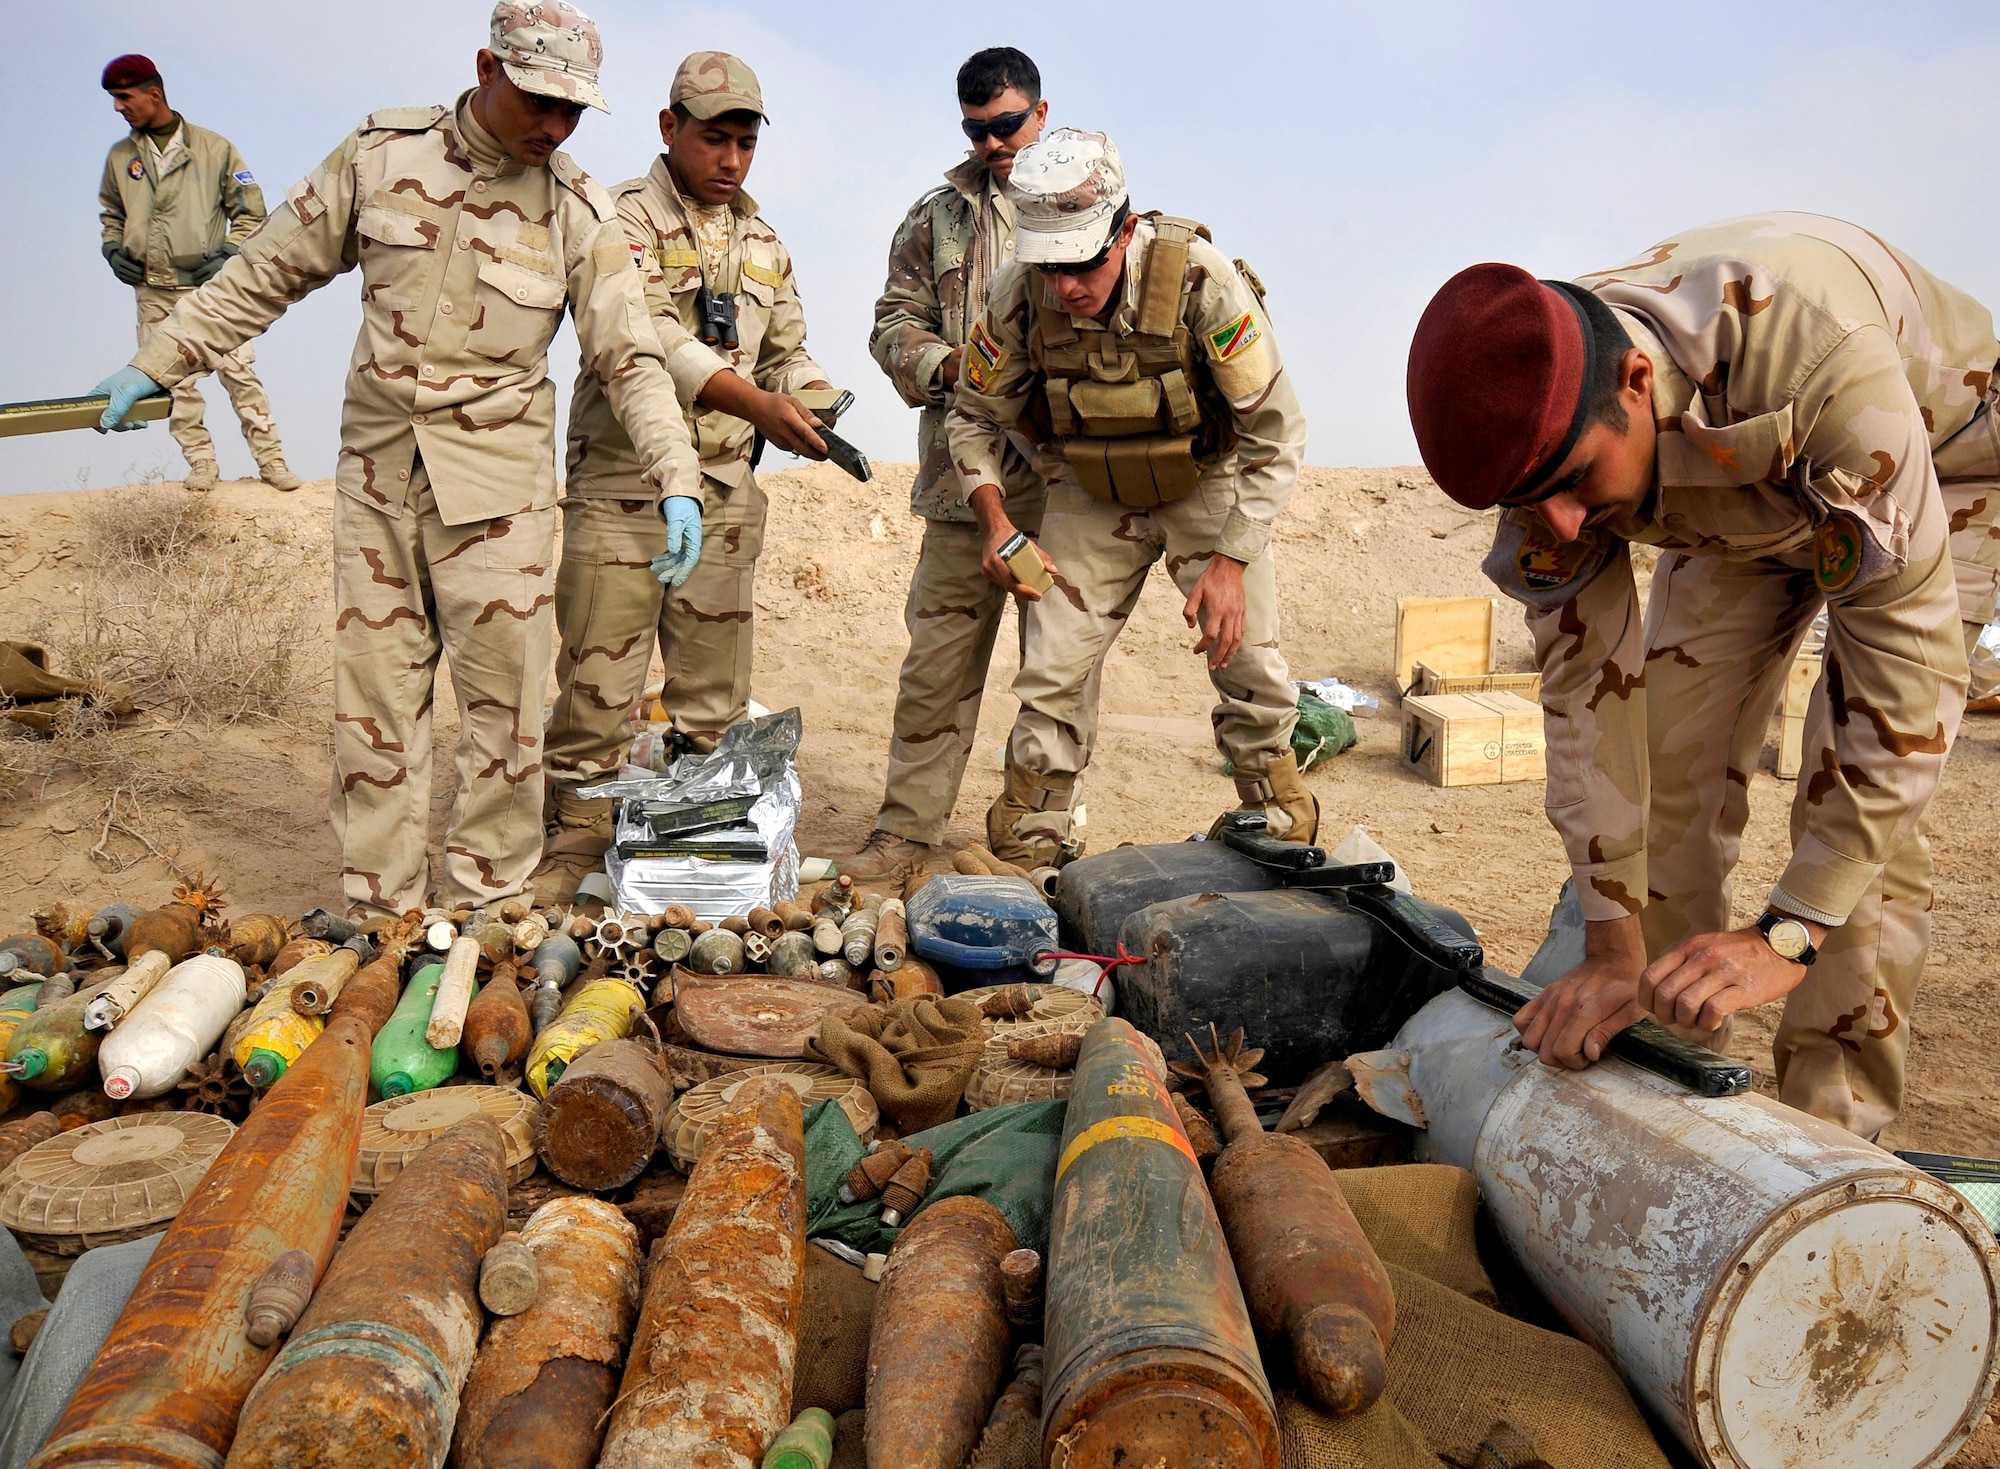 Iraqi army soldiers place C-4 explosives on a collection of loose ordnance in preparation for a control detonation, Nov. 23, 2009 at Mahmudiyah, Iraq. The purpose of the control detonation is to mitigate explosives hazards and limit the enemy's war-fighting capabilities in Iraq.  (U.S. Air Force photo/Staff Sgt. Angelita Lawrence)